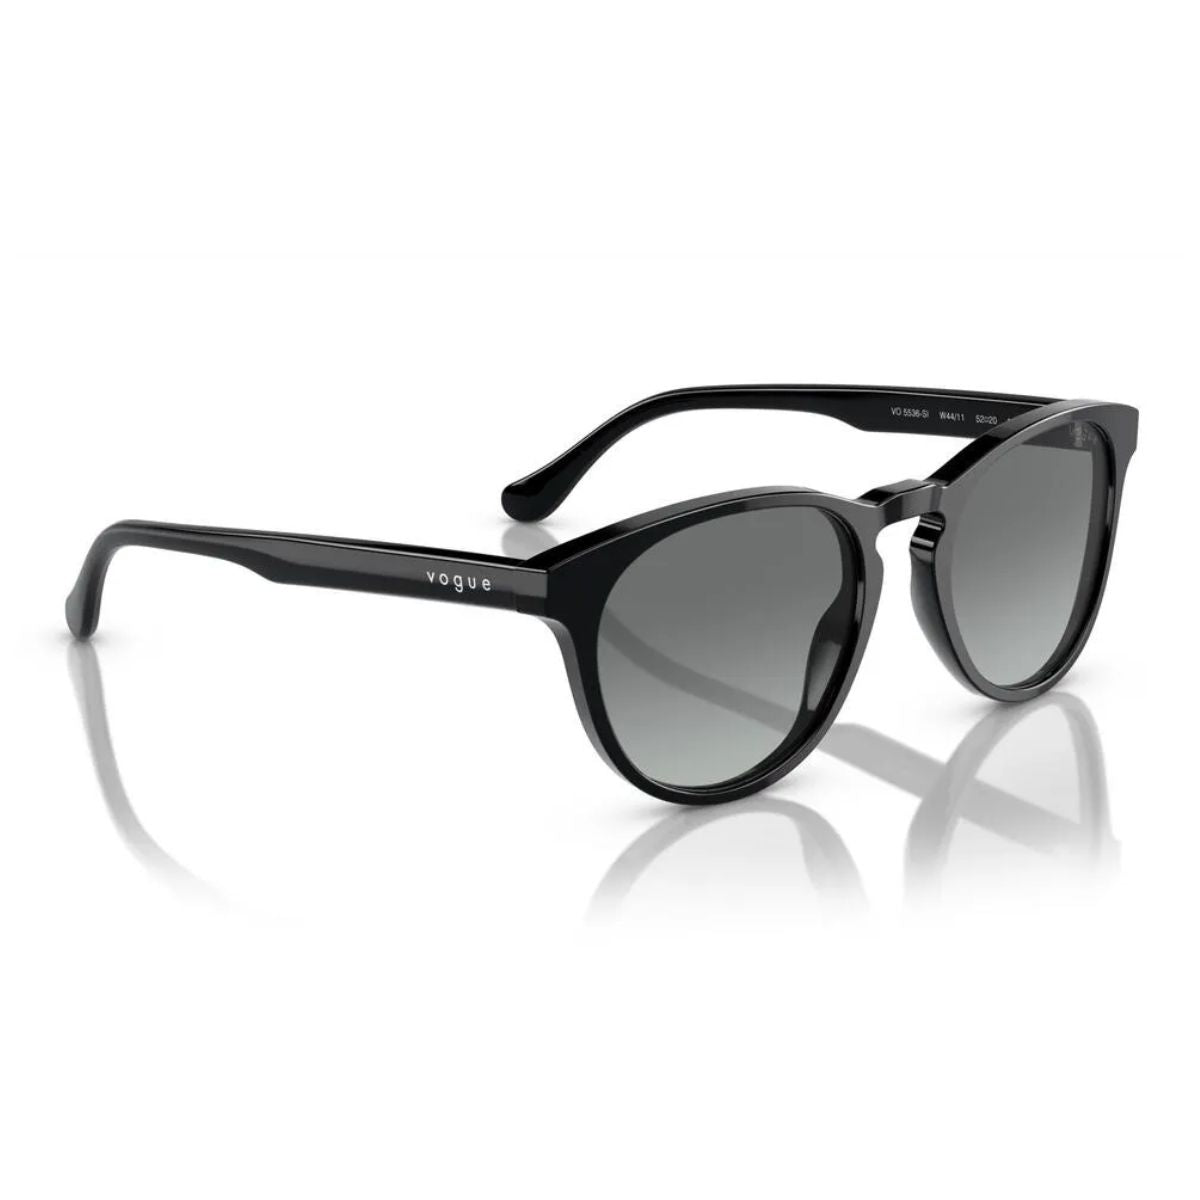 "Stylish Oval Shape UV Protection Sunglasses For Ladies At Online Optorium Store"